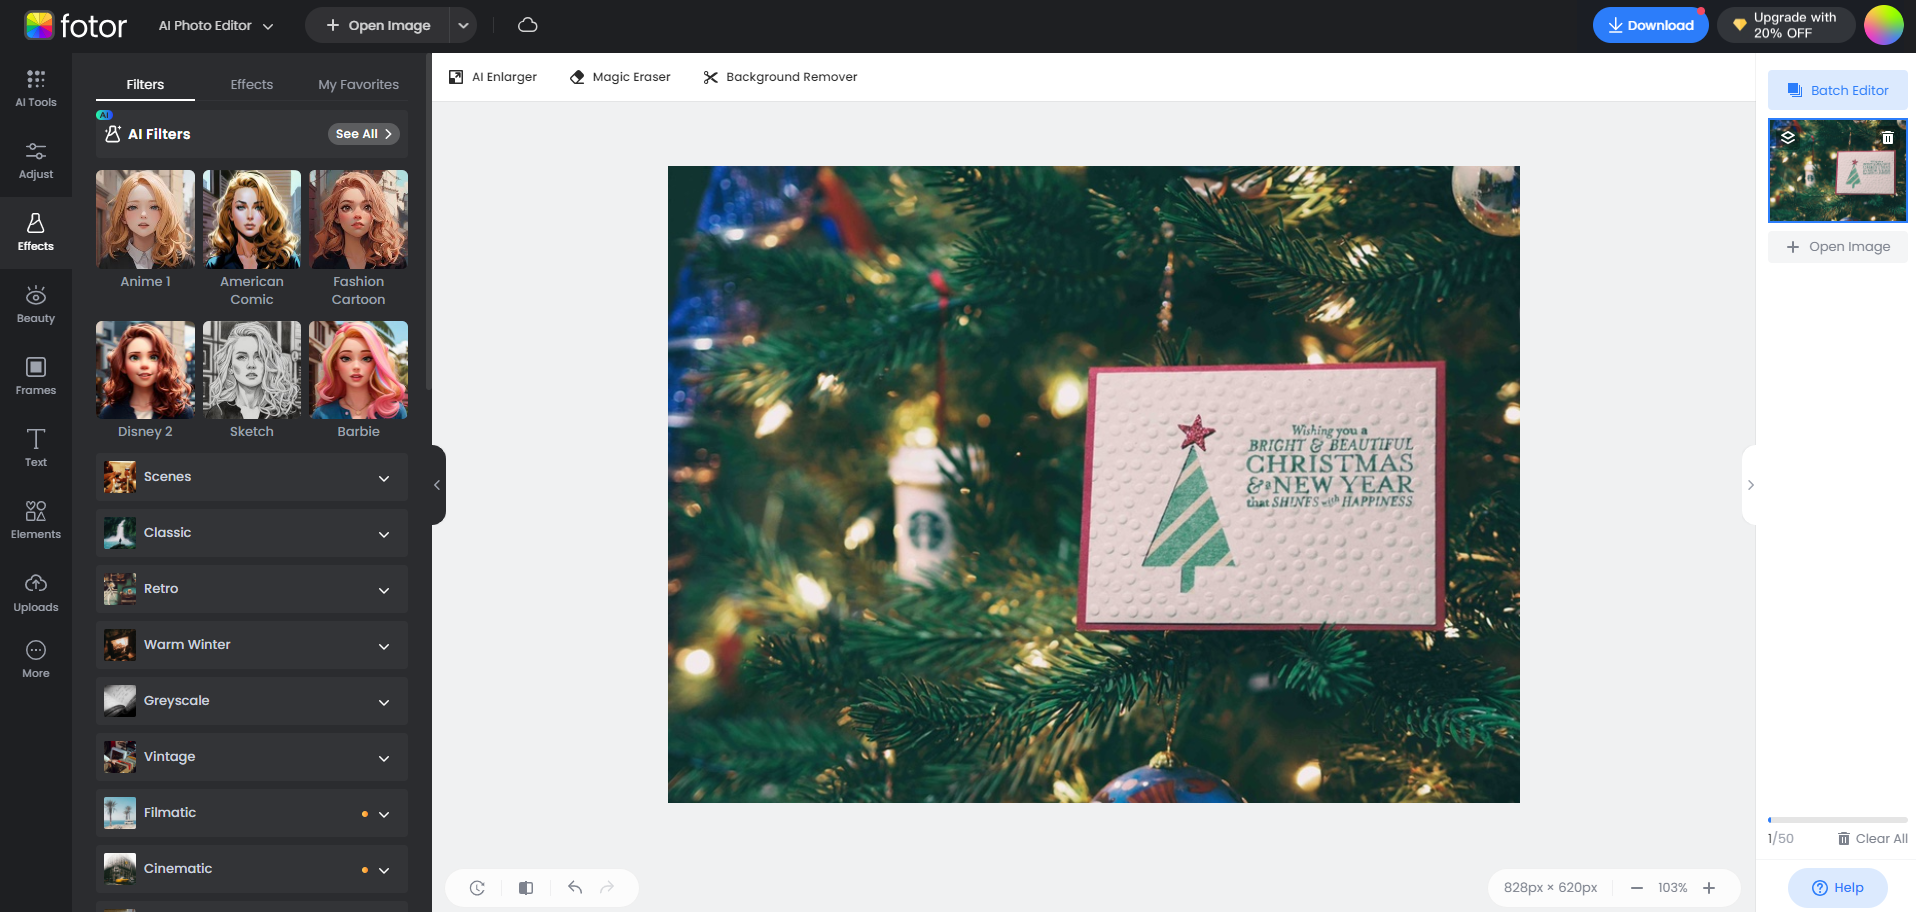 apply photo filter to a christmas tree photo